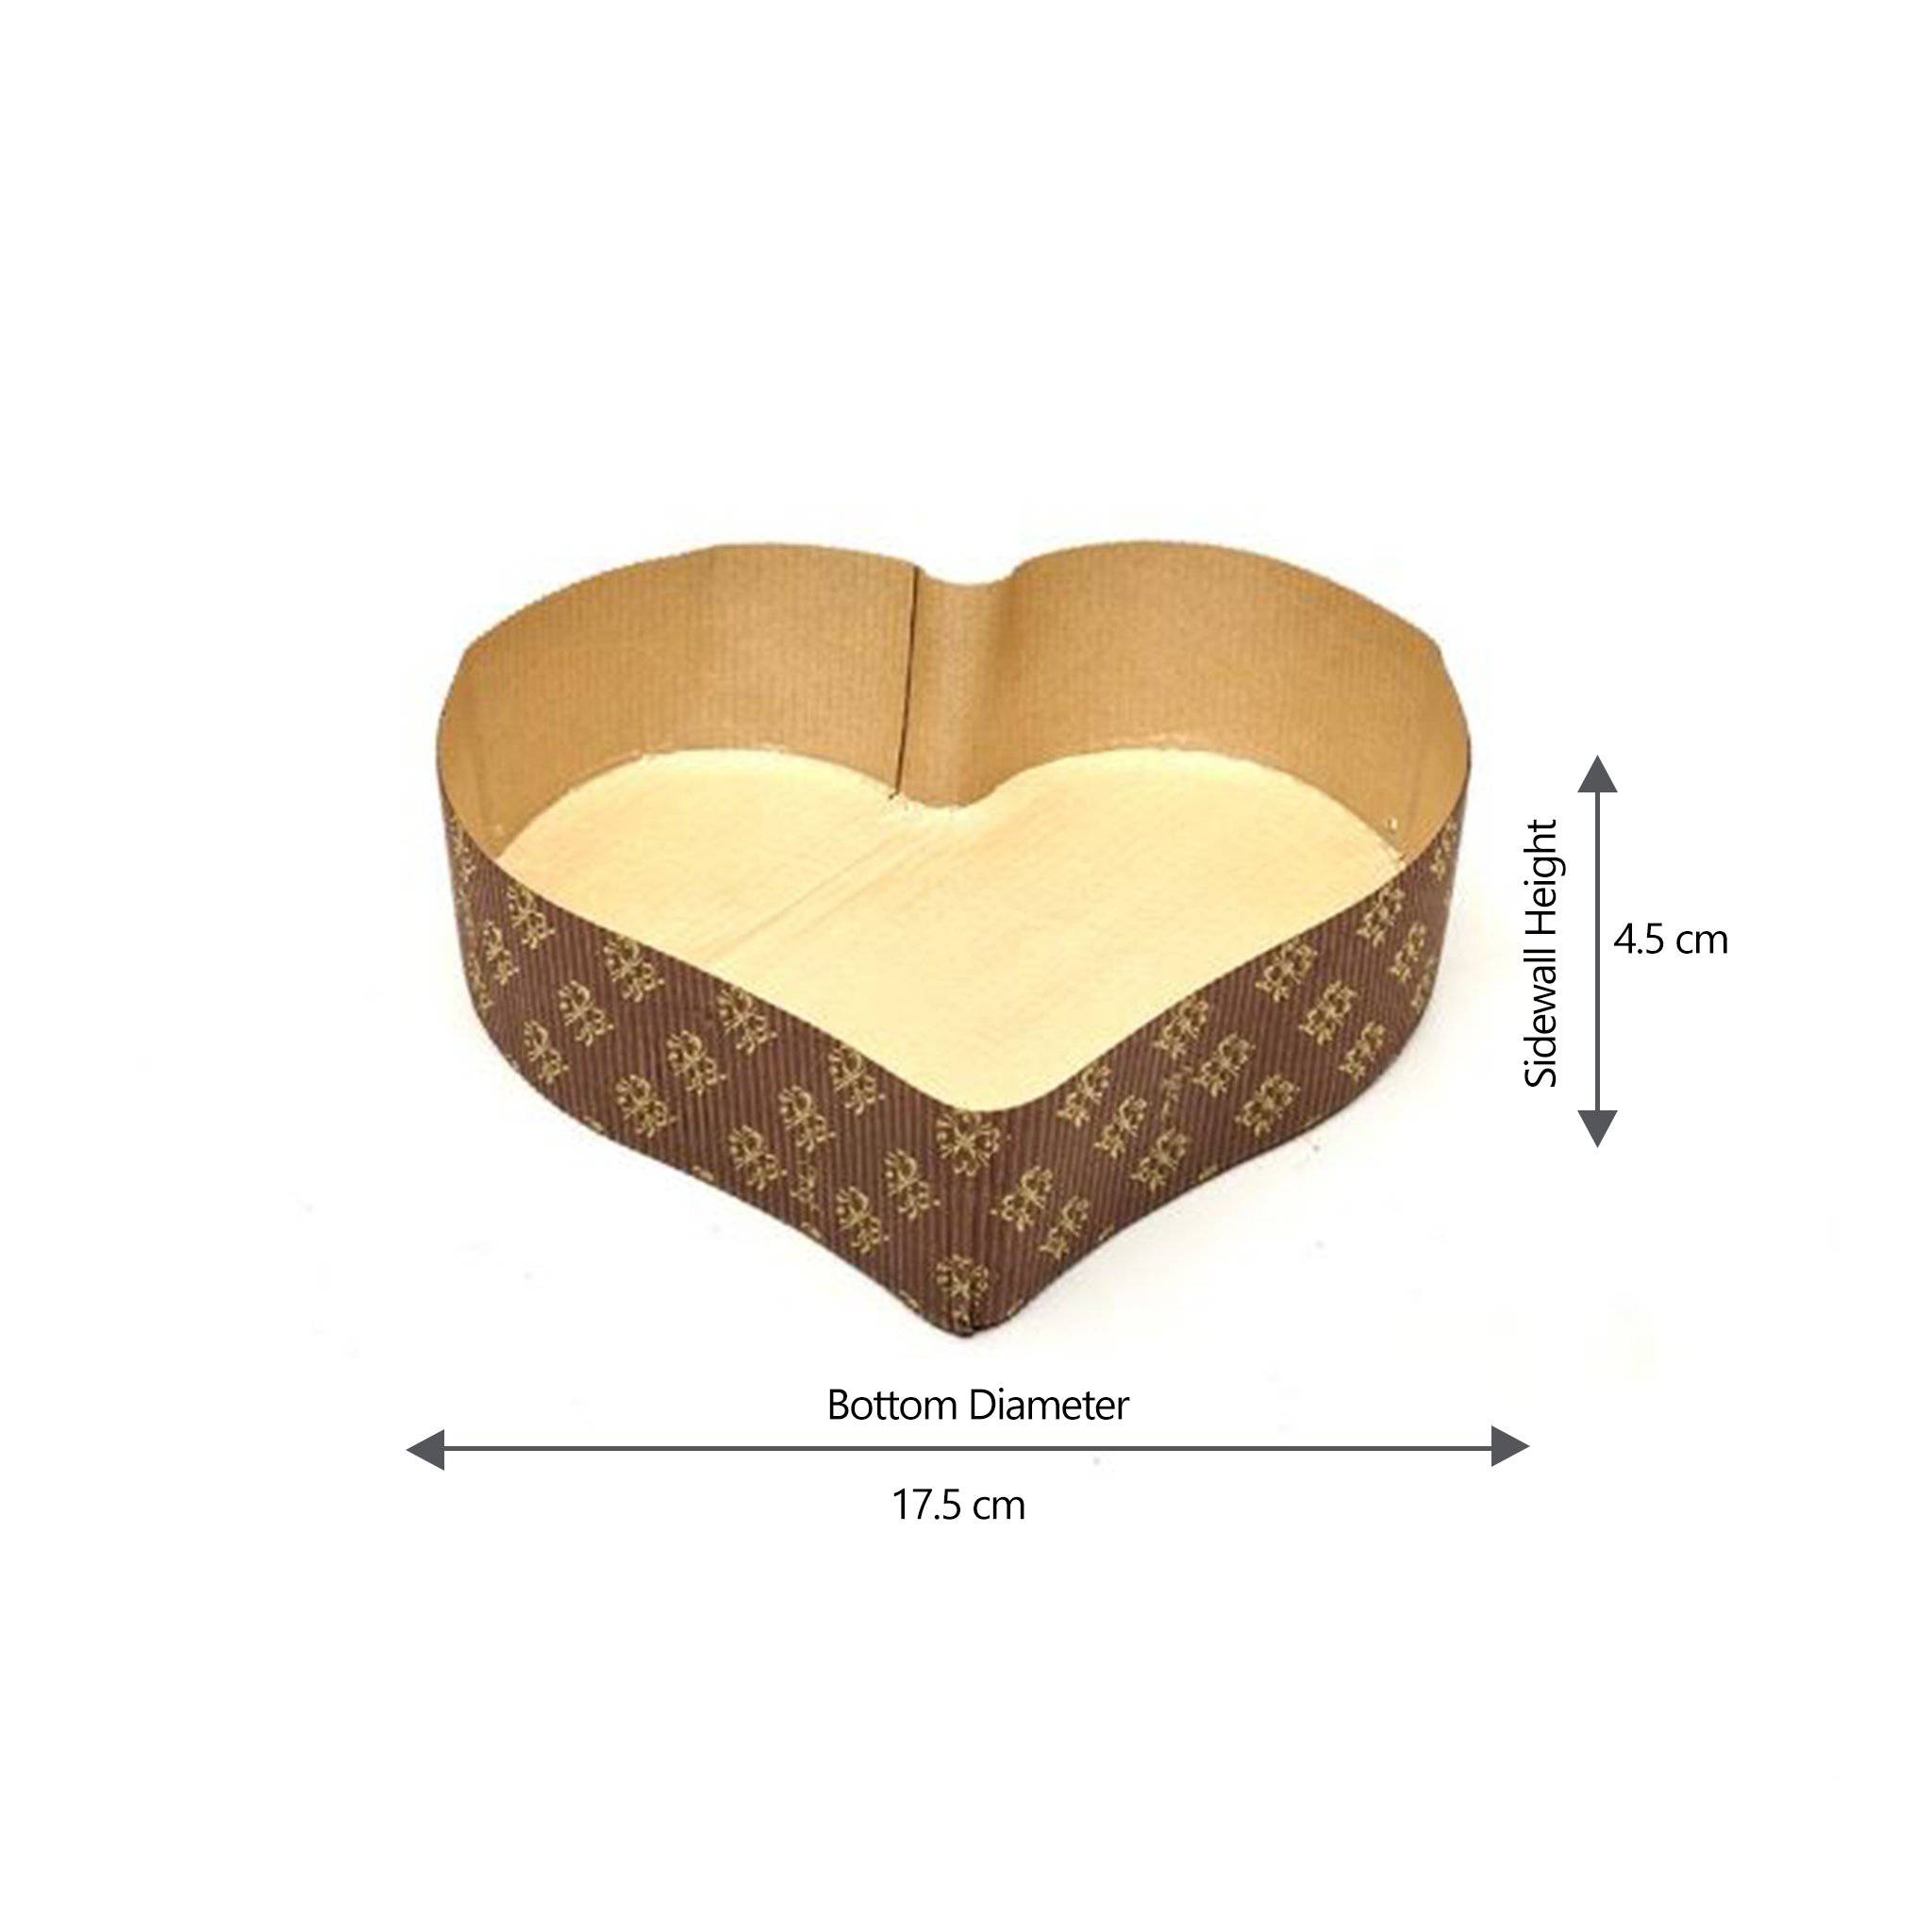 Hotpack |Baking Mold Heart Shape 17.5x4.5 cm |600 Pieces - Hotpack Global